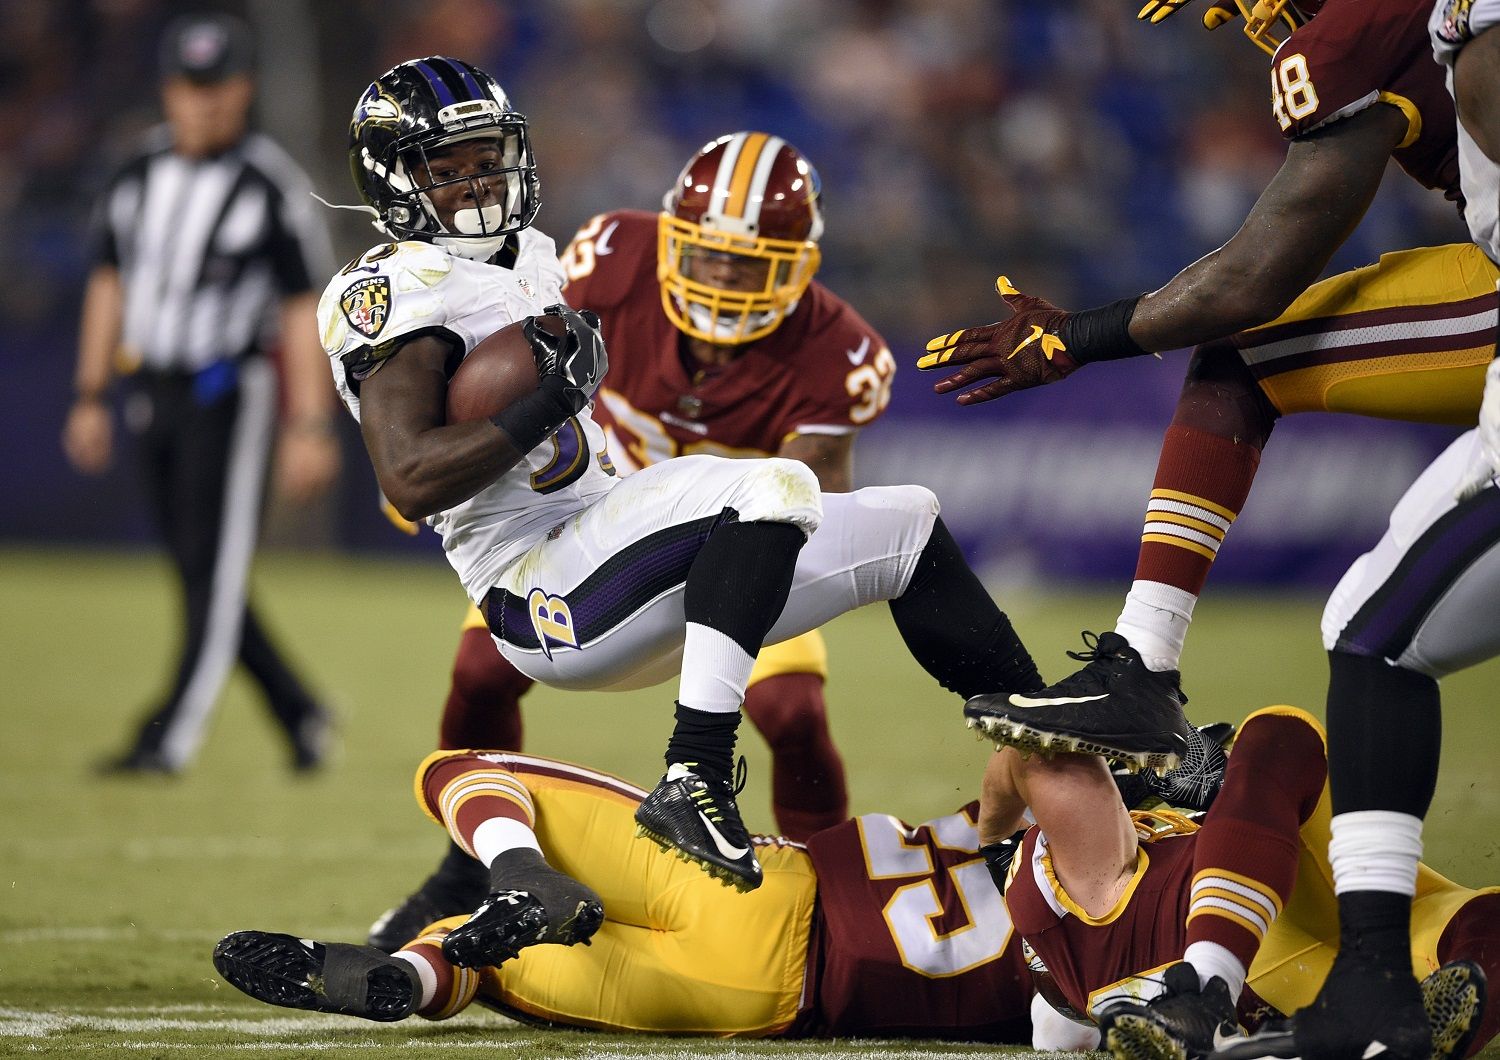 Baltimore Ravens running back Taquan Mizzell (33) is tackled in the second half of a preseason NFL football game against the Washington Redskins, Thursday, Aug. 10, 2017, in Baltimore. (AP Photo/Nick Wass)